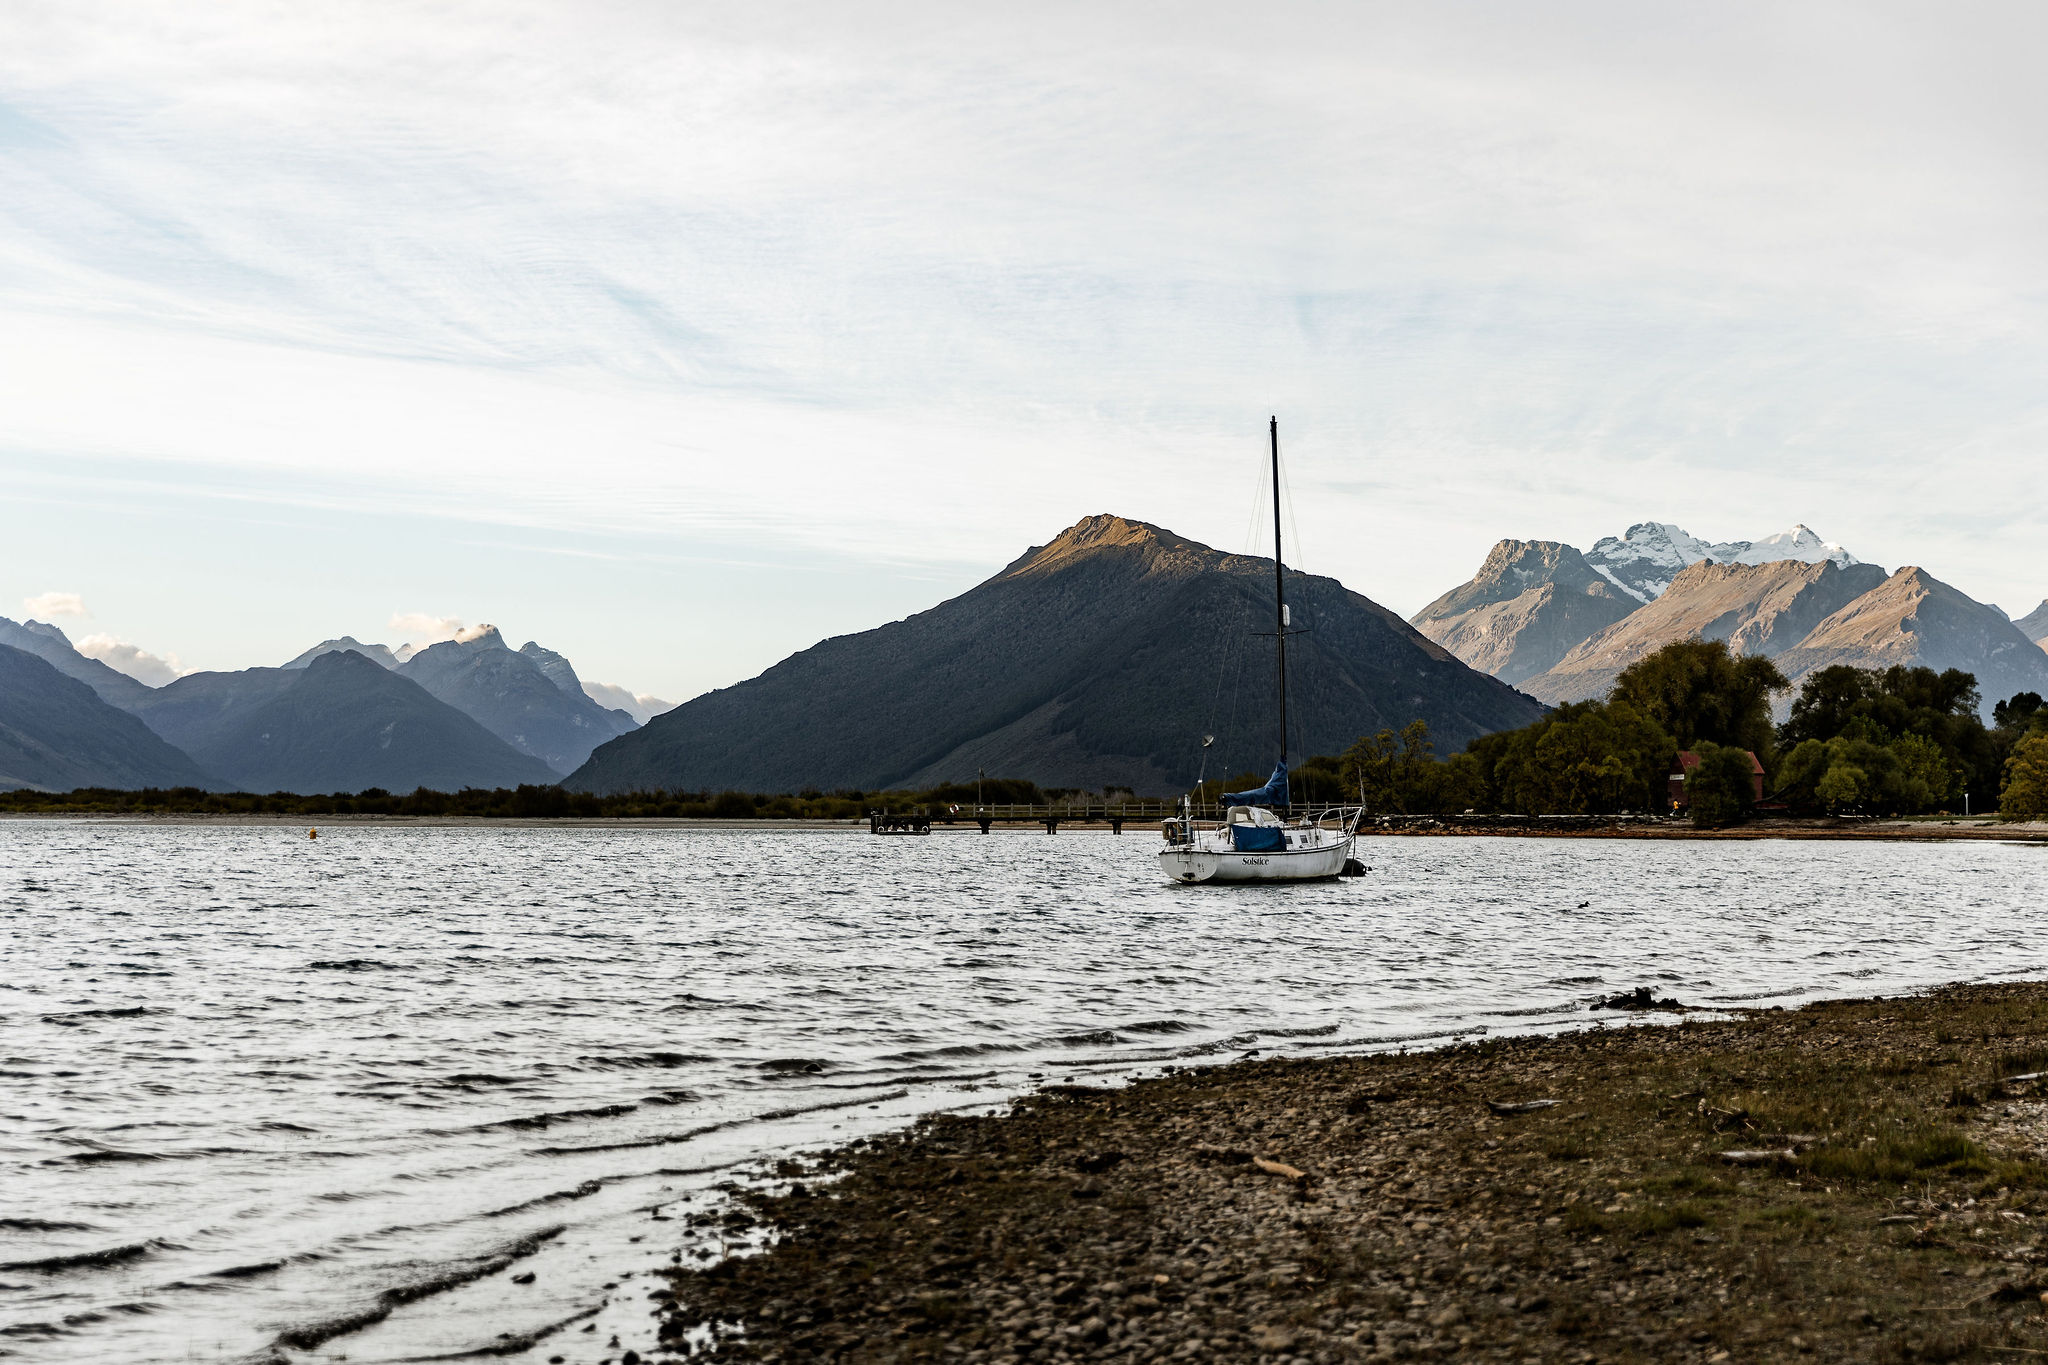 Head of the Lake Glenorchy - Susan Miller Photography